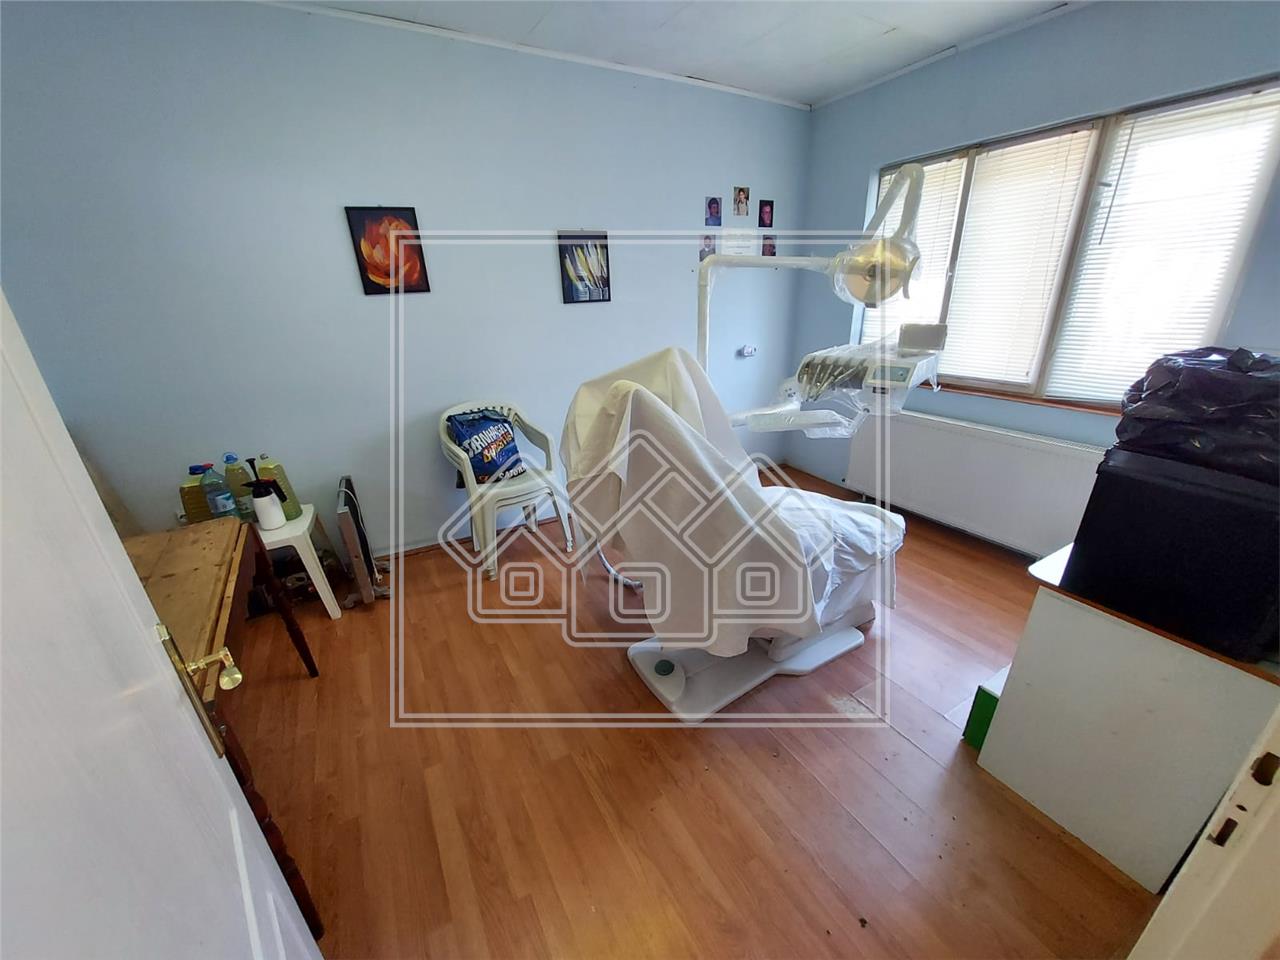 House for sale in Sibiu - 5 rooms - Terezian area